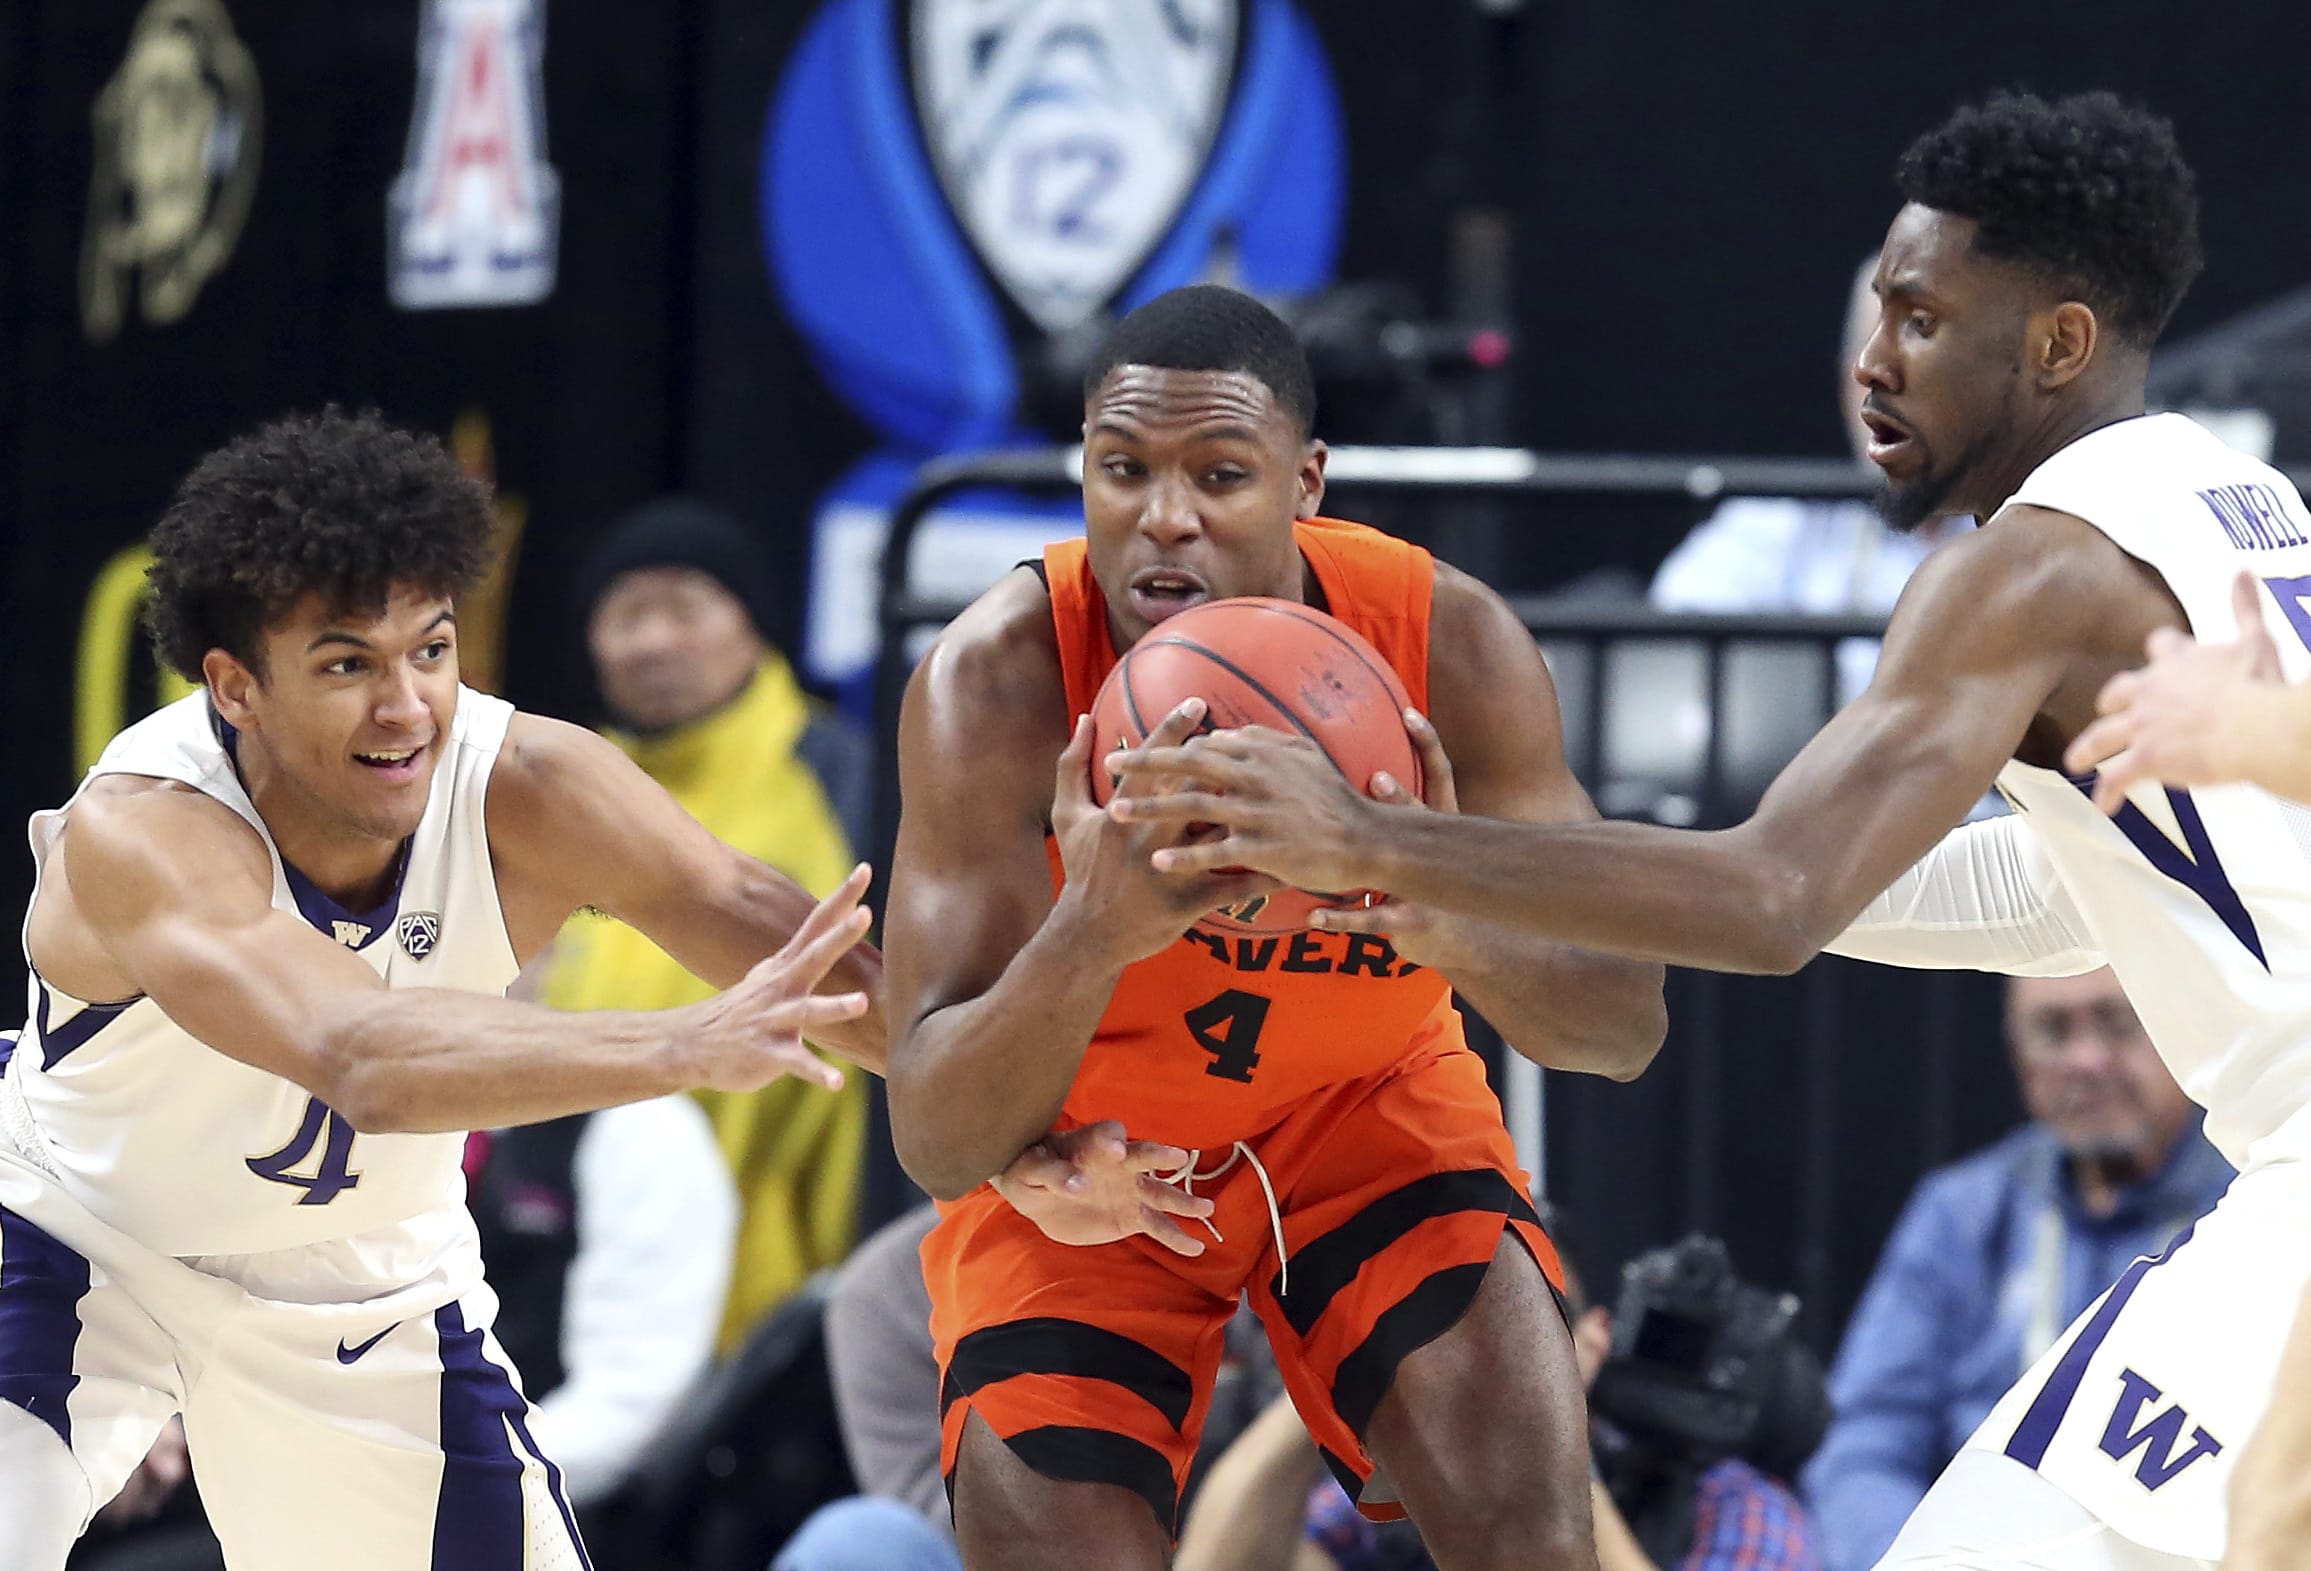 Washington's Matisse Thybulle, left, and Jaylen Nowell, right, and Oregon State's Alfred Hollins reach for a loose ball during the first half of an NCAA college basketball game in the first round of the Pac-12 men's tournament Wednesday, March 7, 2018, in Las Vegas.